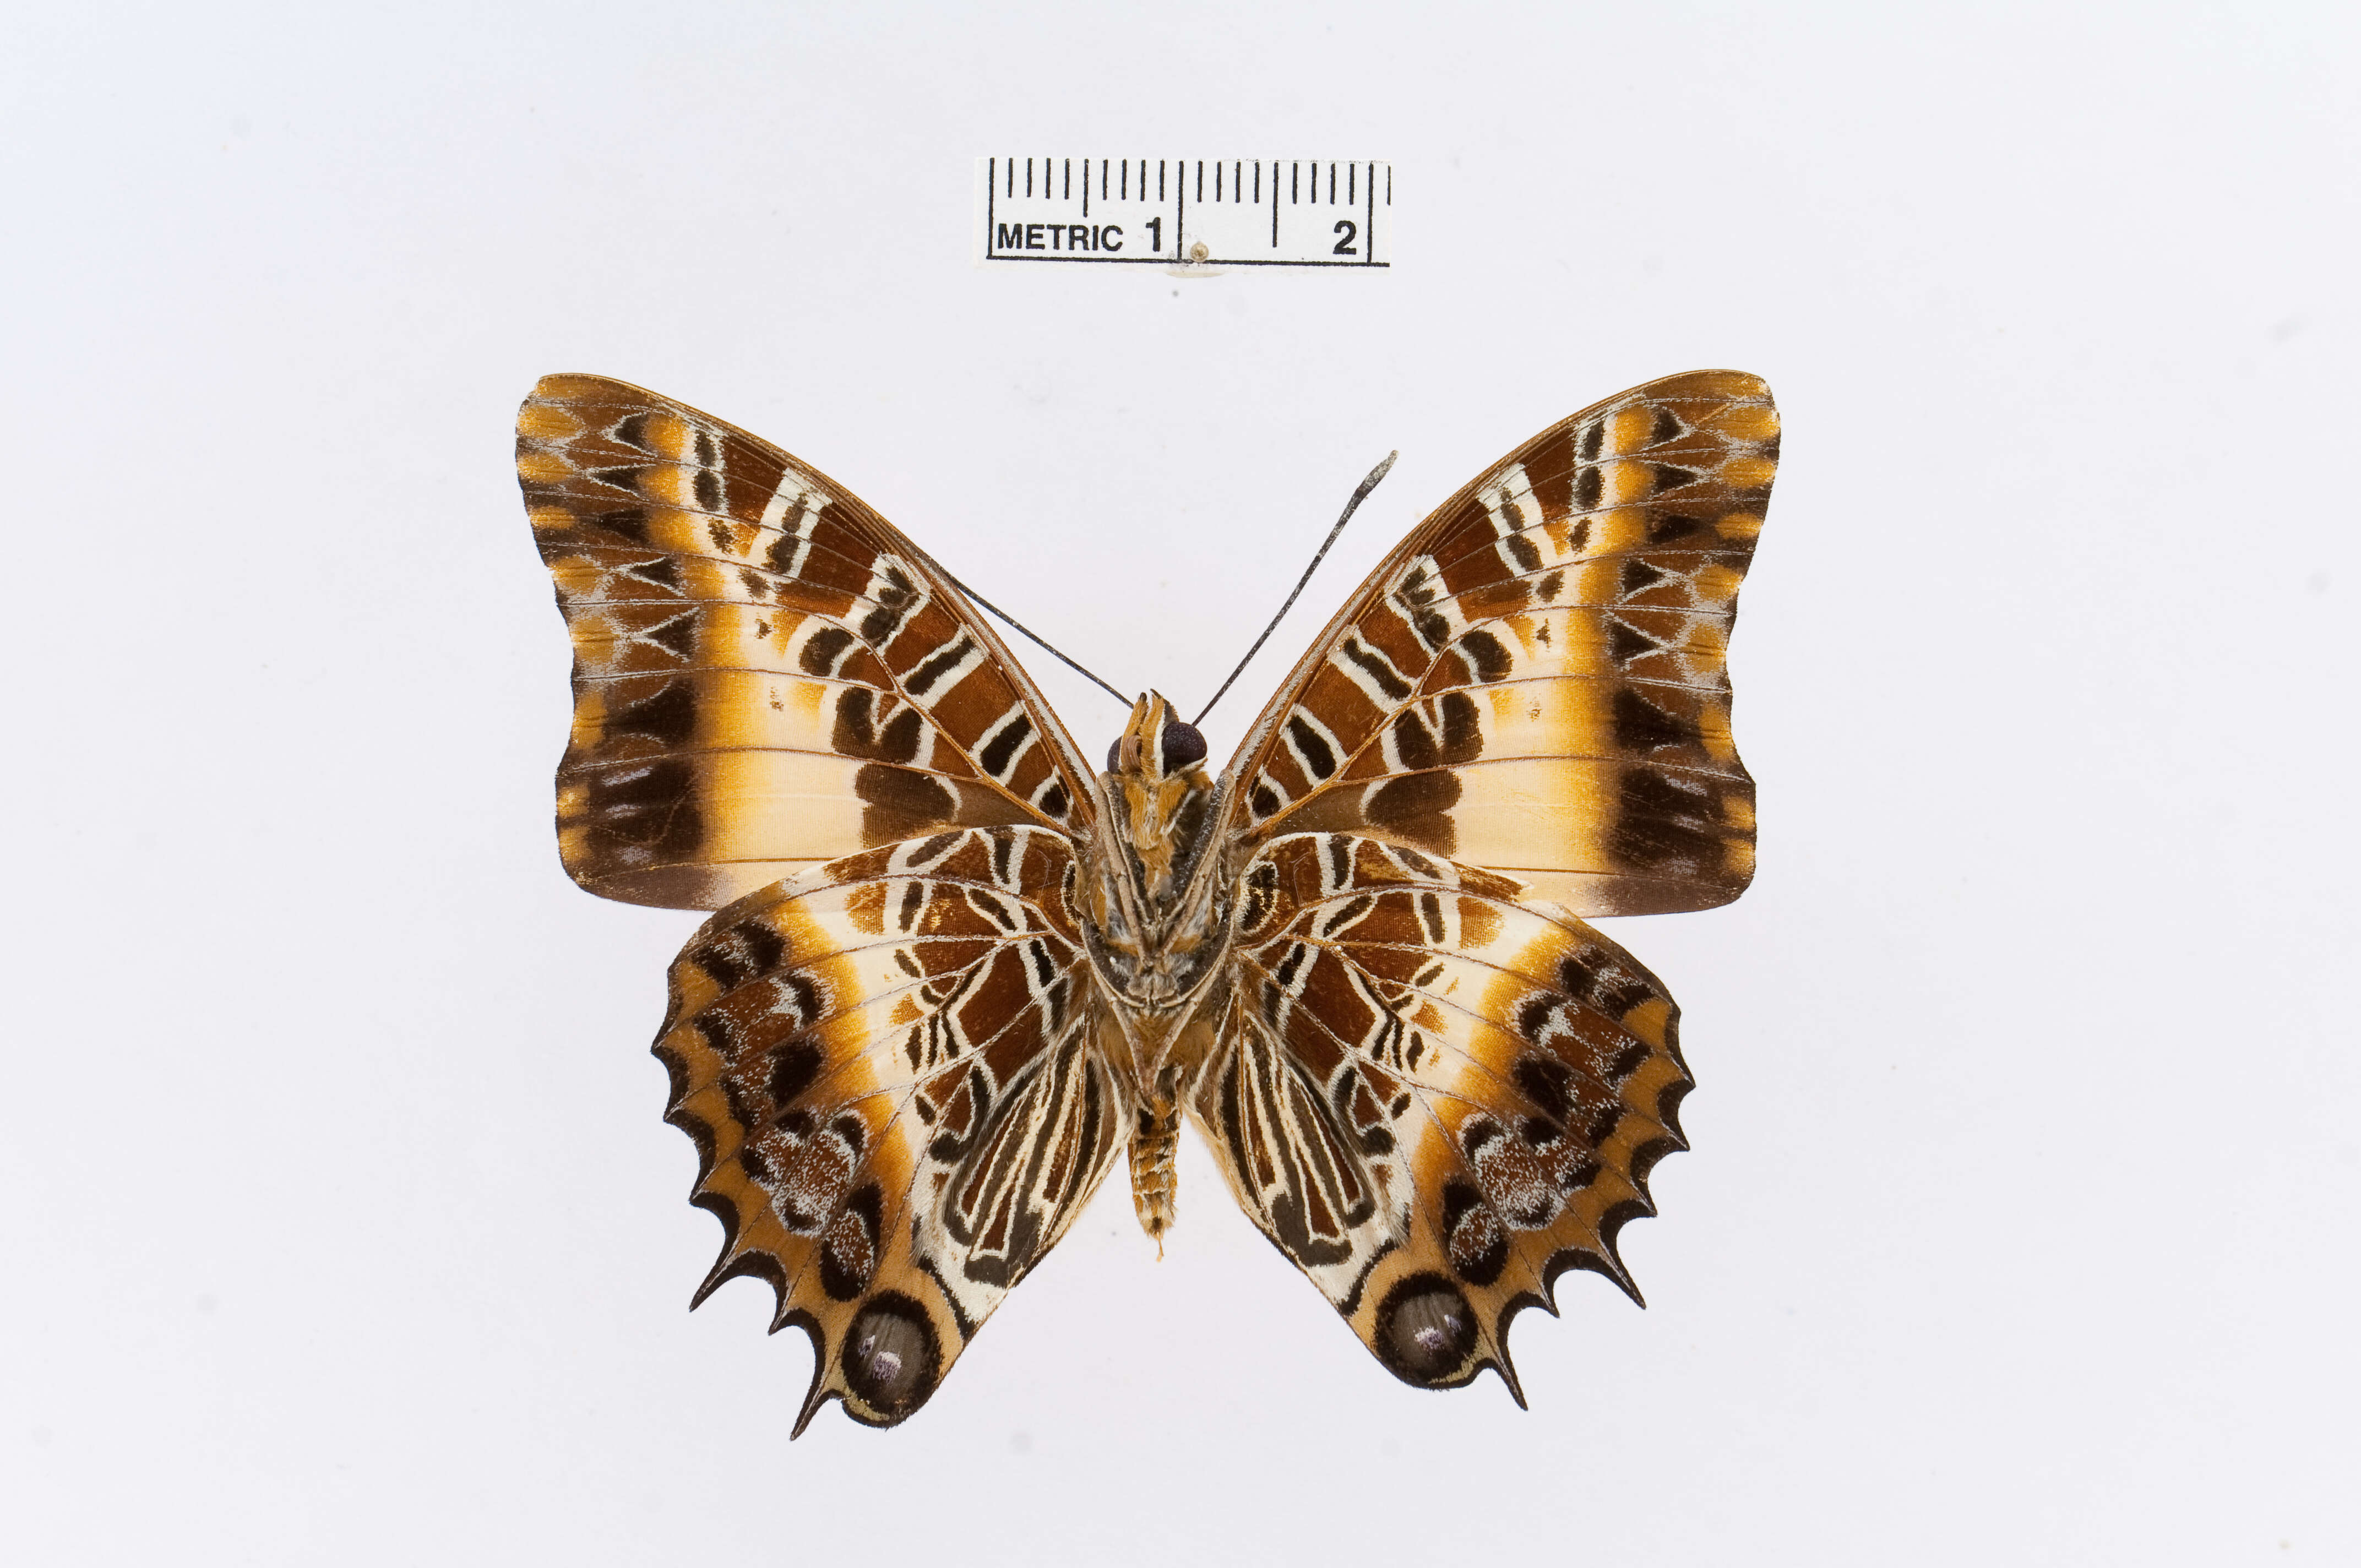 Image of Charaxes pollux